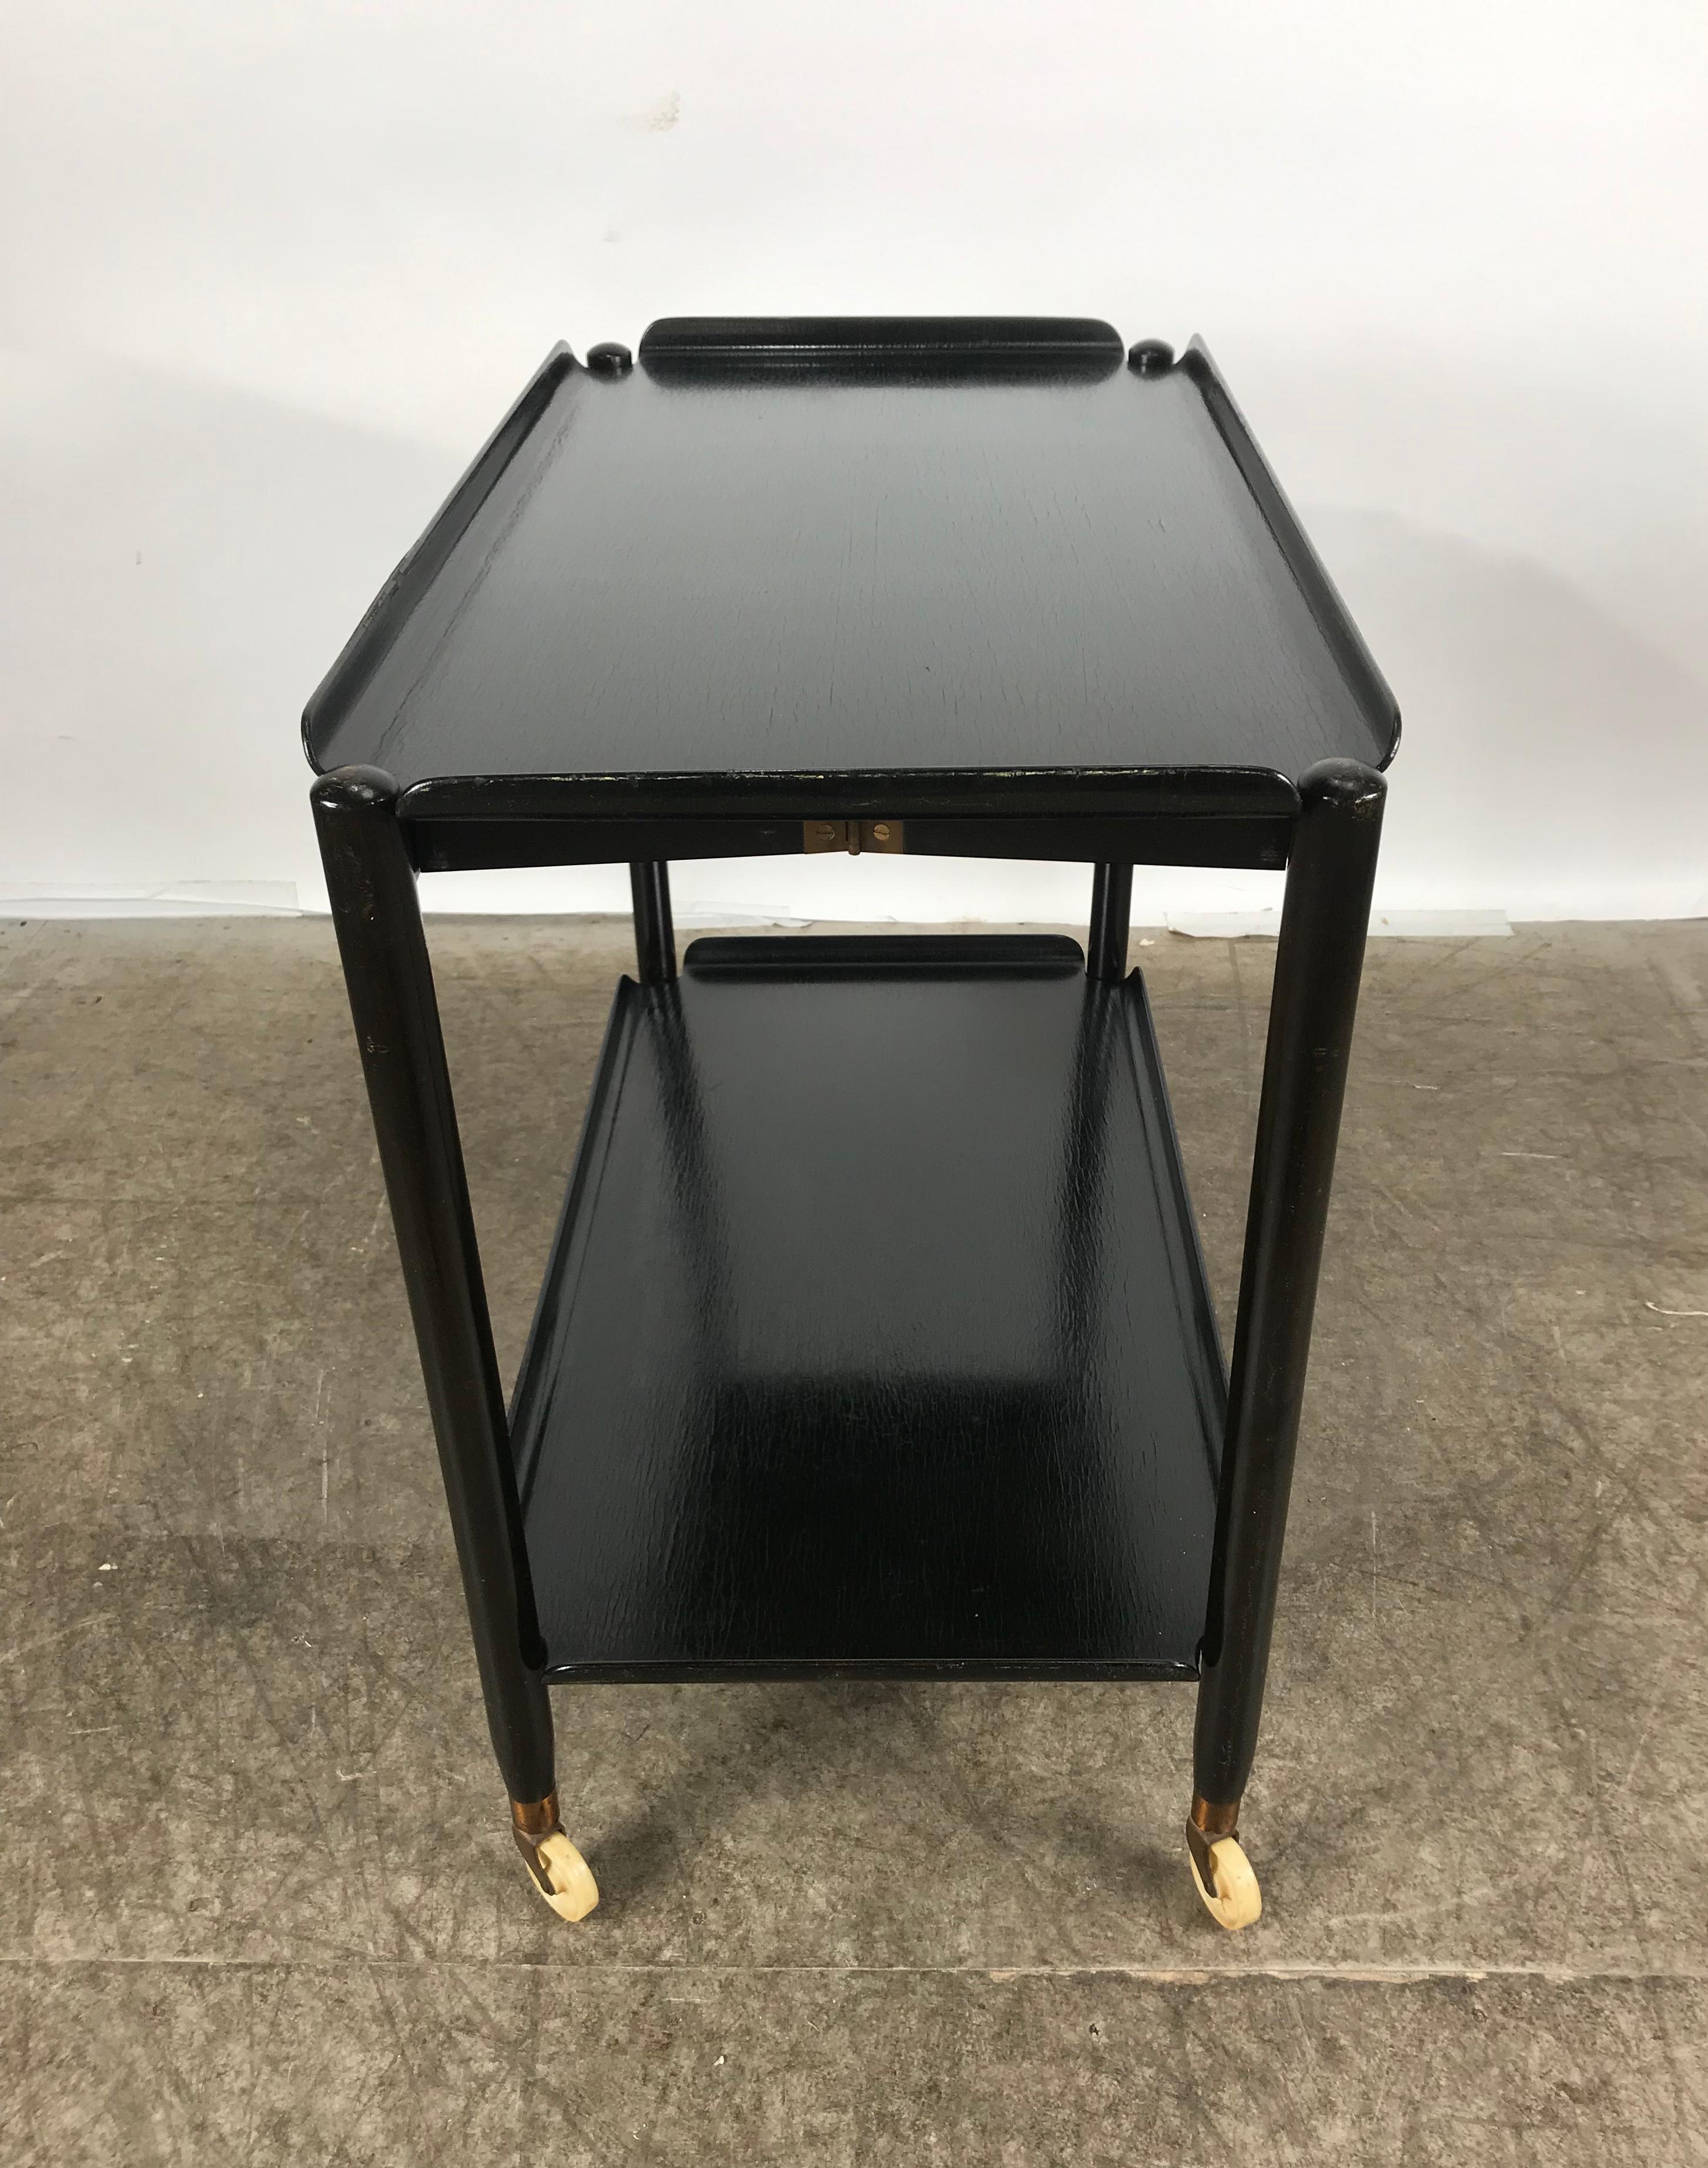 Classic Danish Modernist Two-Tier Collapsible Rolling Tray Table / Serving Cart (20. Jahrhundert)